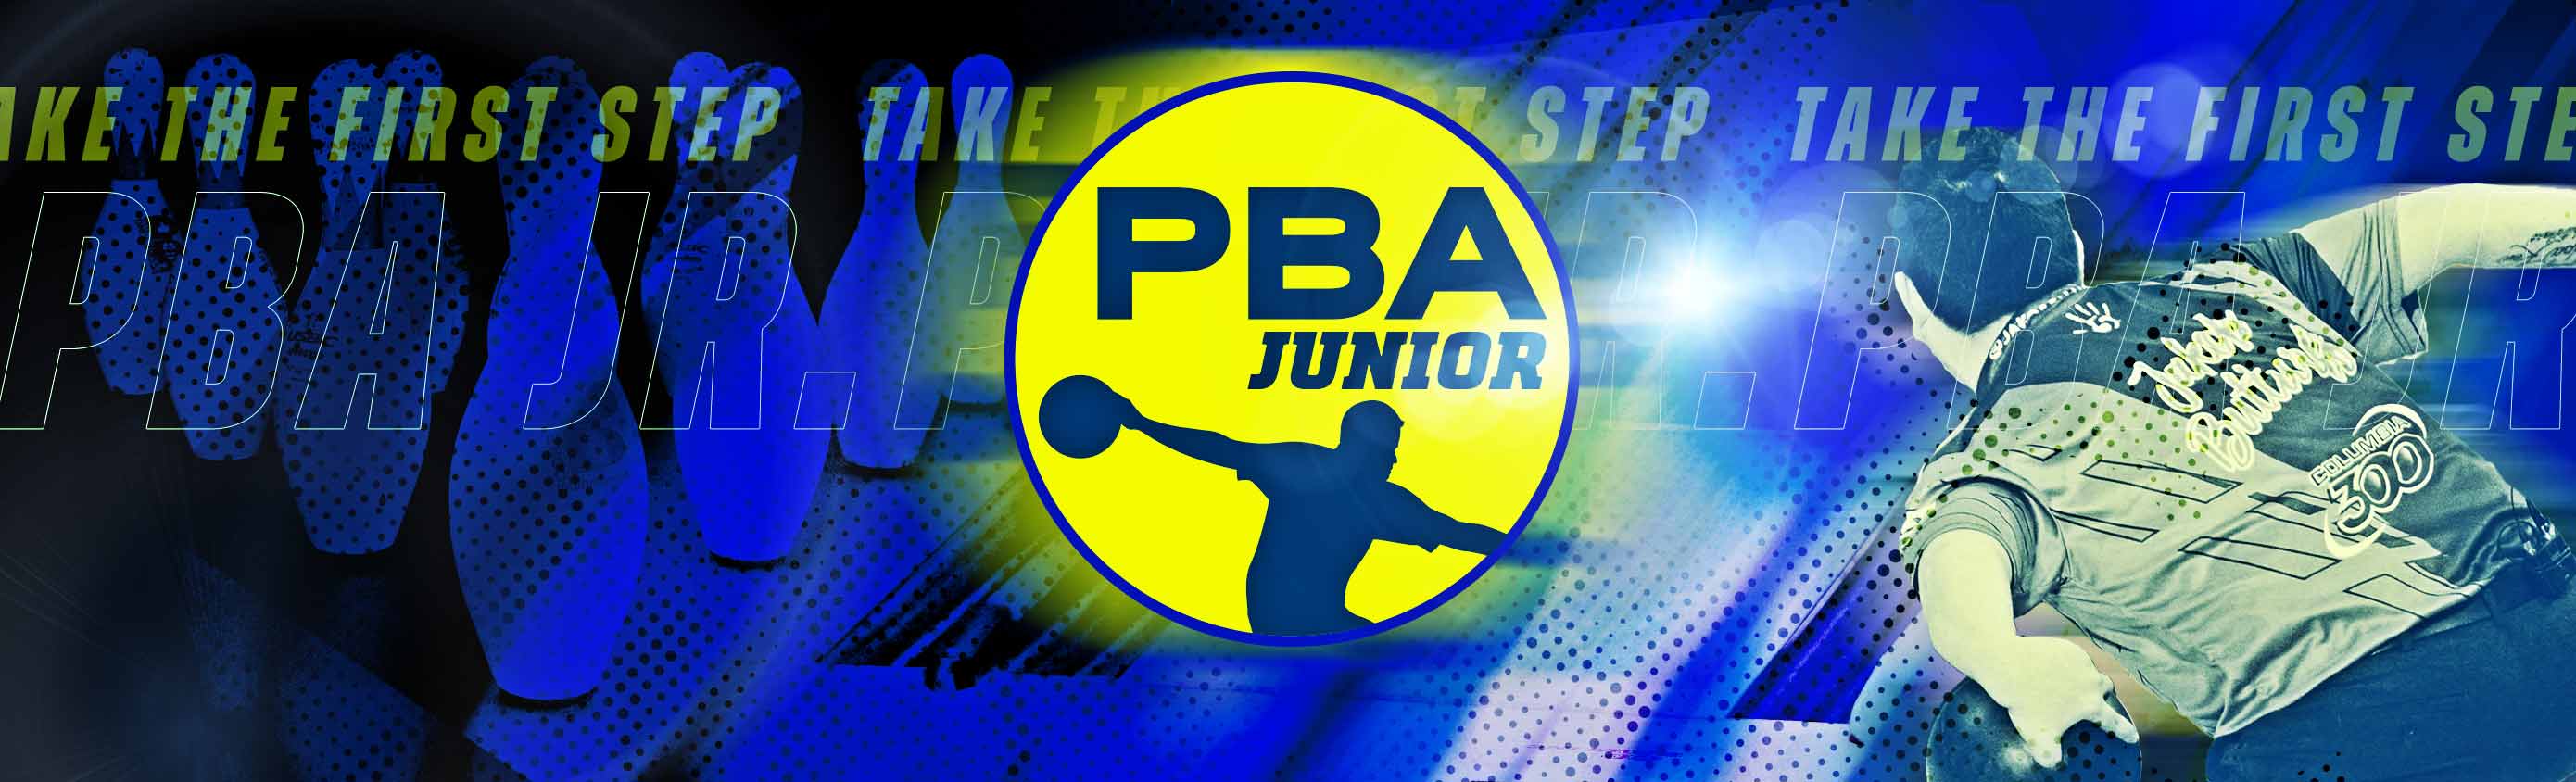 PBA Junior logo over a blue background with pins and a bowler taking a shot.